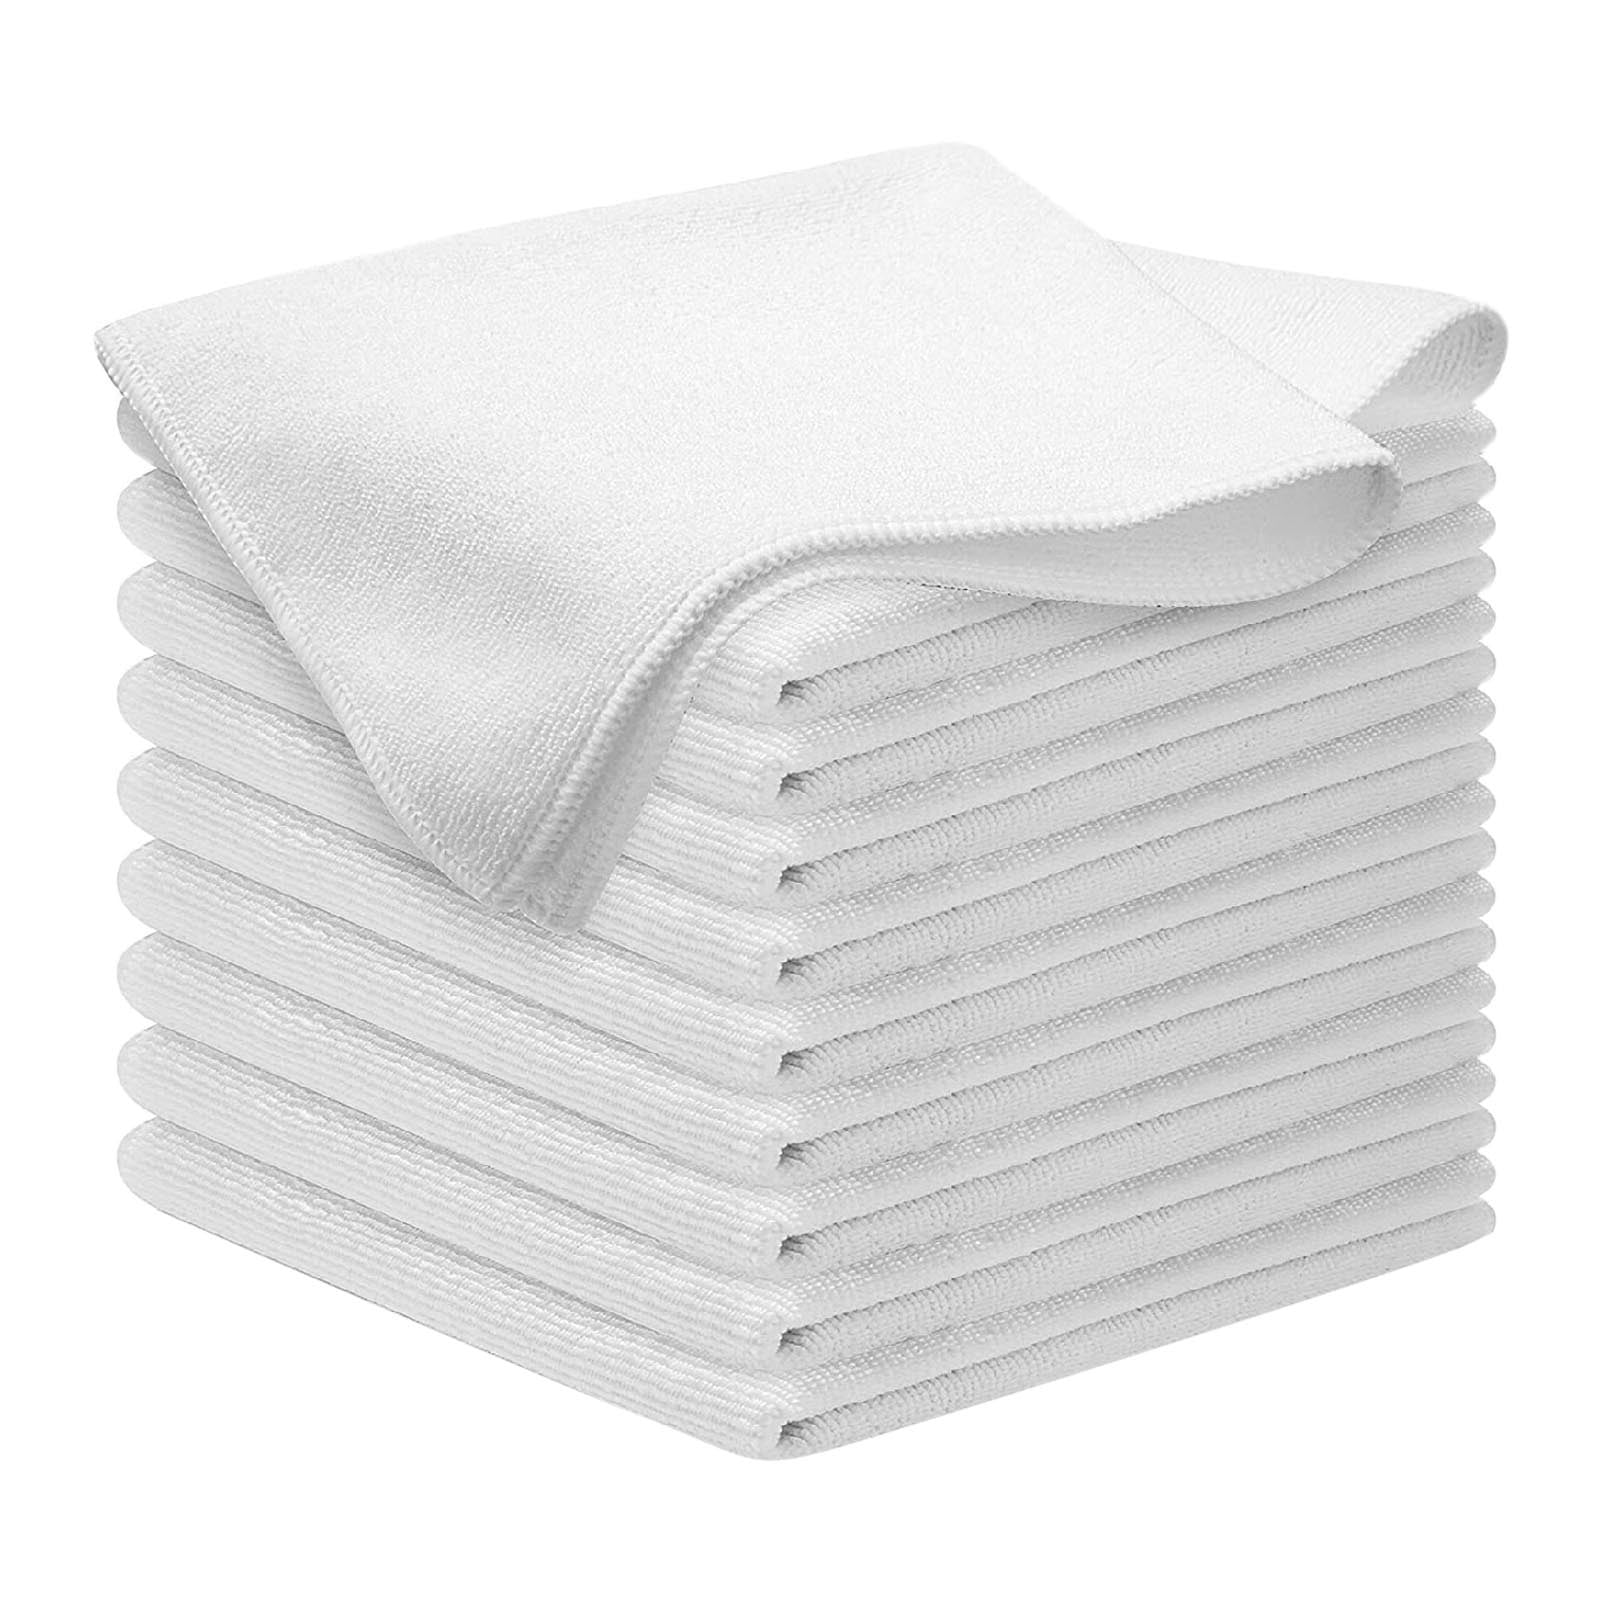 Microfiber Cleaning Cloths Pre Washed Ultra Absorbant Towel For ...